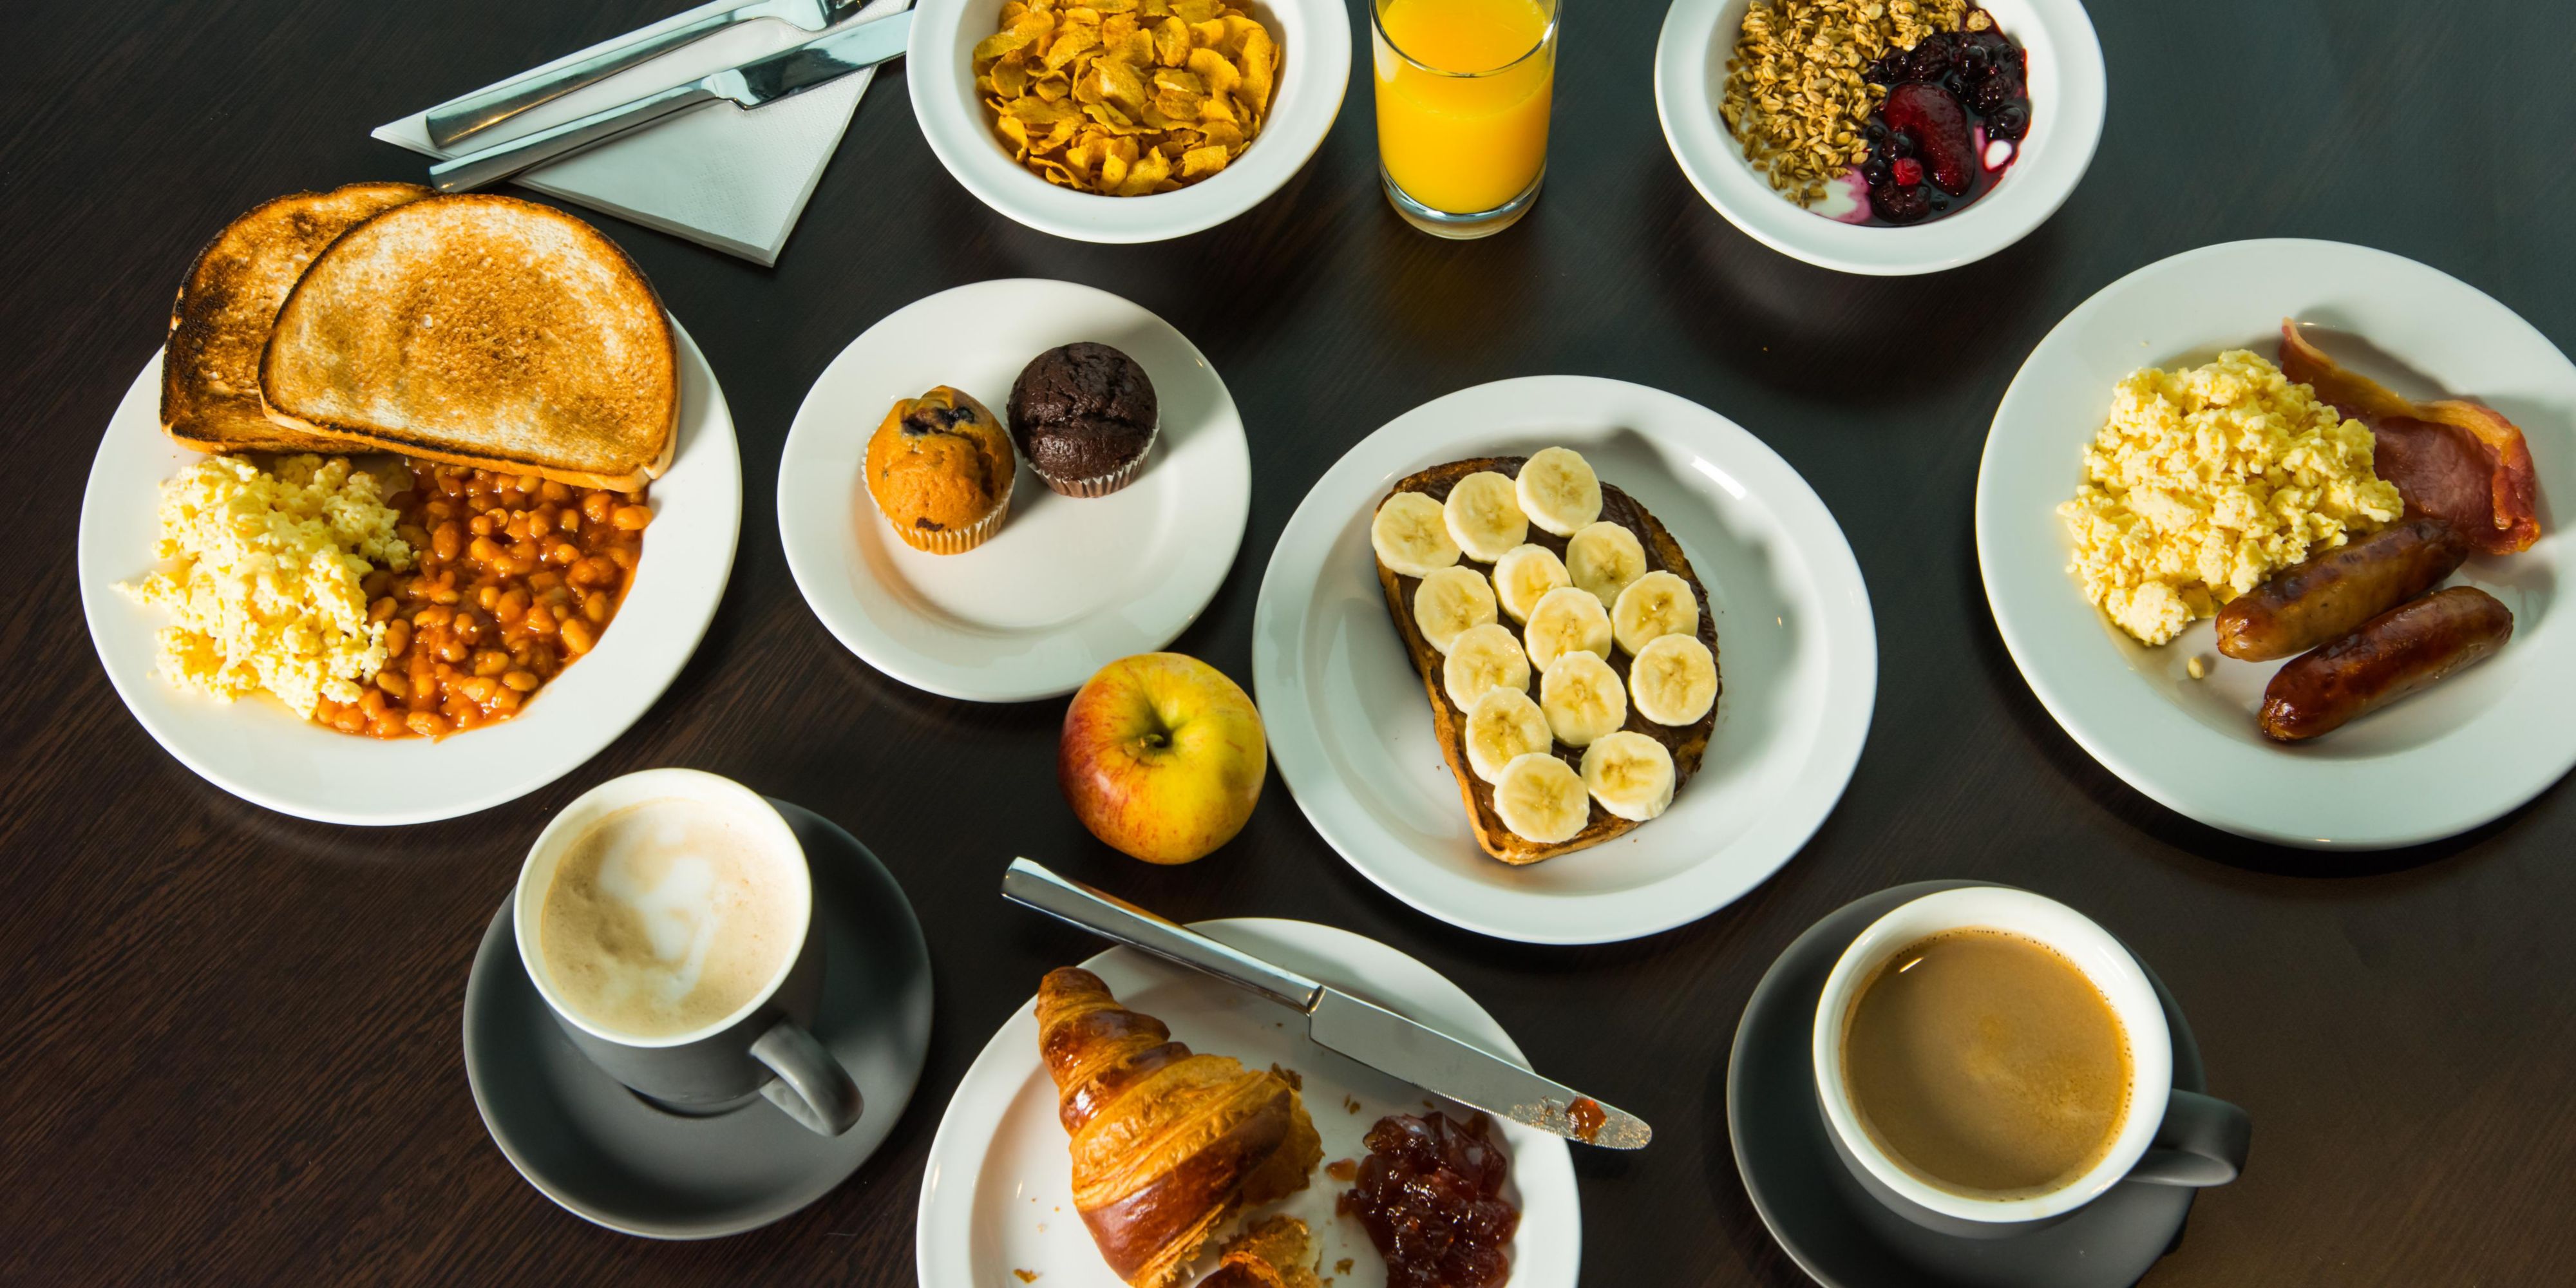 Kick-start your morning with our inclusive breakfast buffet. Choose from a selection of hot and cold items like bacon, scrambled egg, sausages, toast and pastries. Grab & Go bags are available if you're in a hurry!